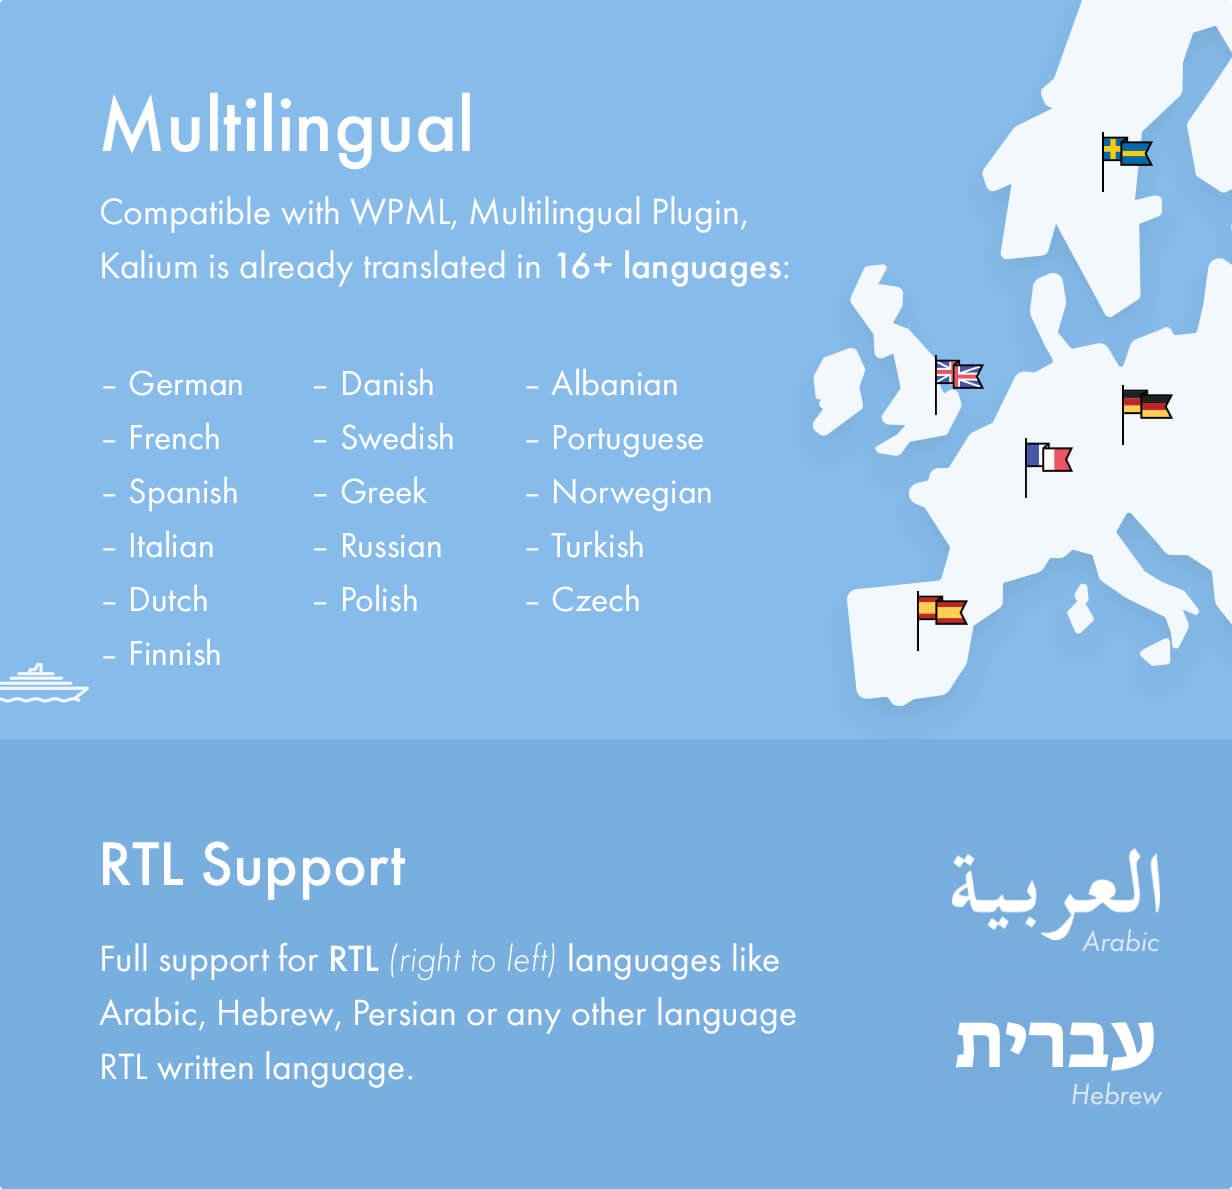 Multilingual and RTL Support